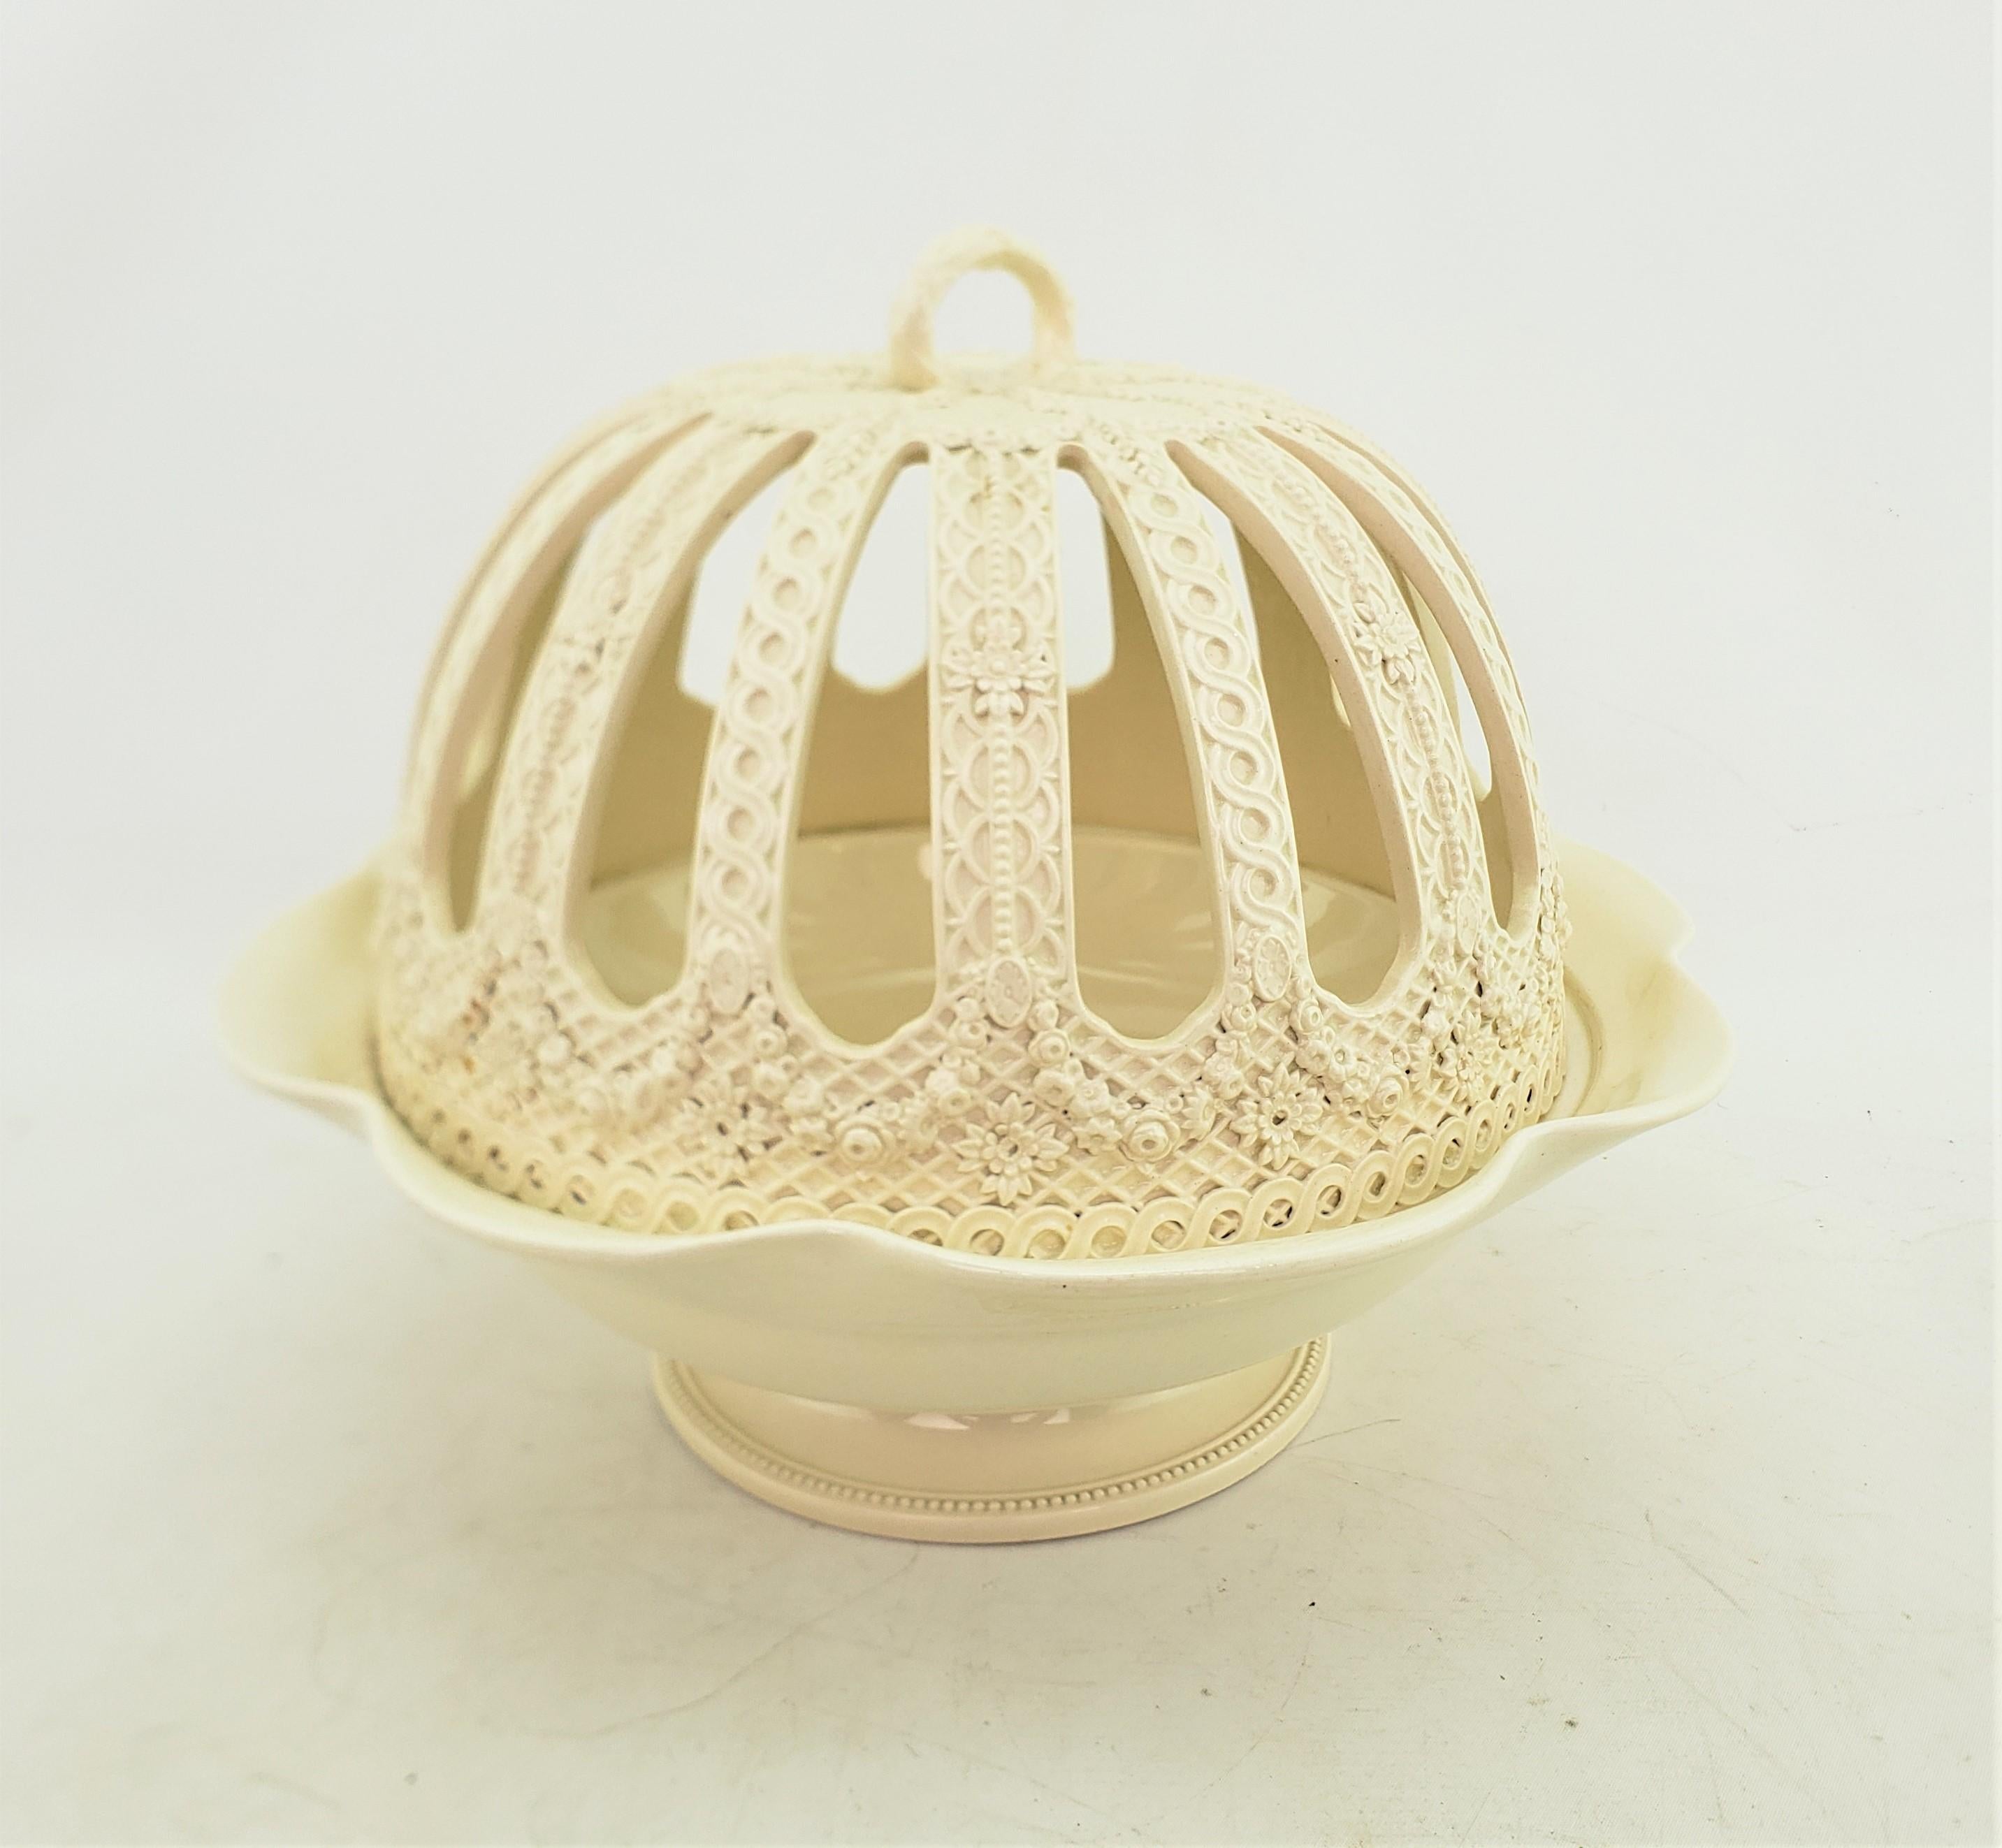 This antique covered bowl was made by the Wedgwood factory of England in approximately 1920 and done in a Georgian style. This orange bowl is composed of creamware ceramic, also known as Queen's Ware and has a bottom bowl with a scalloped edge with